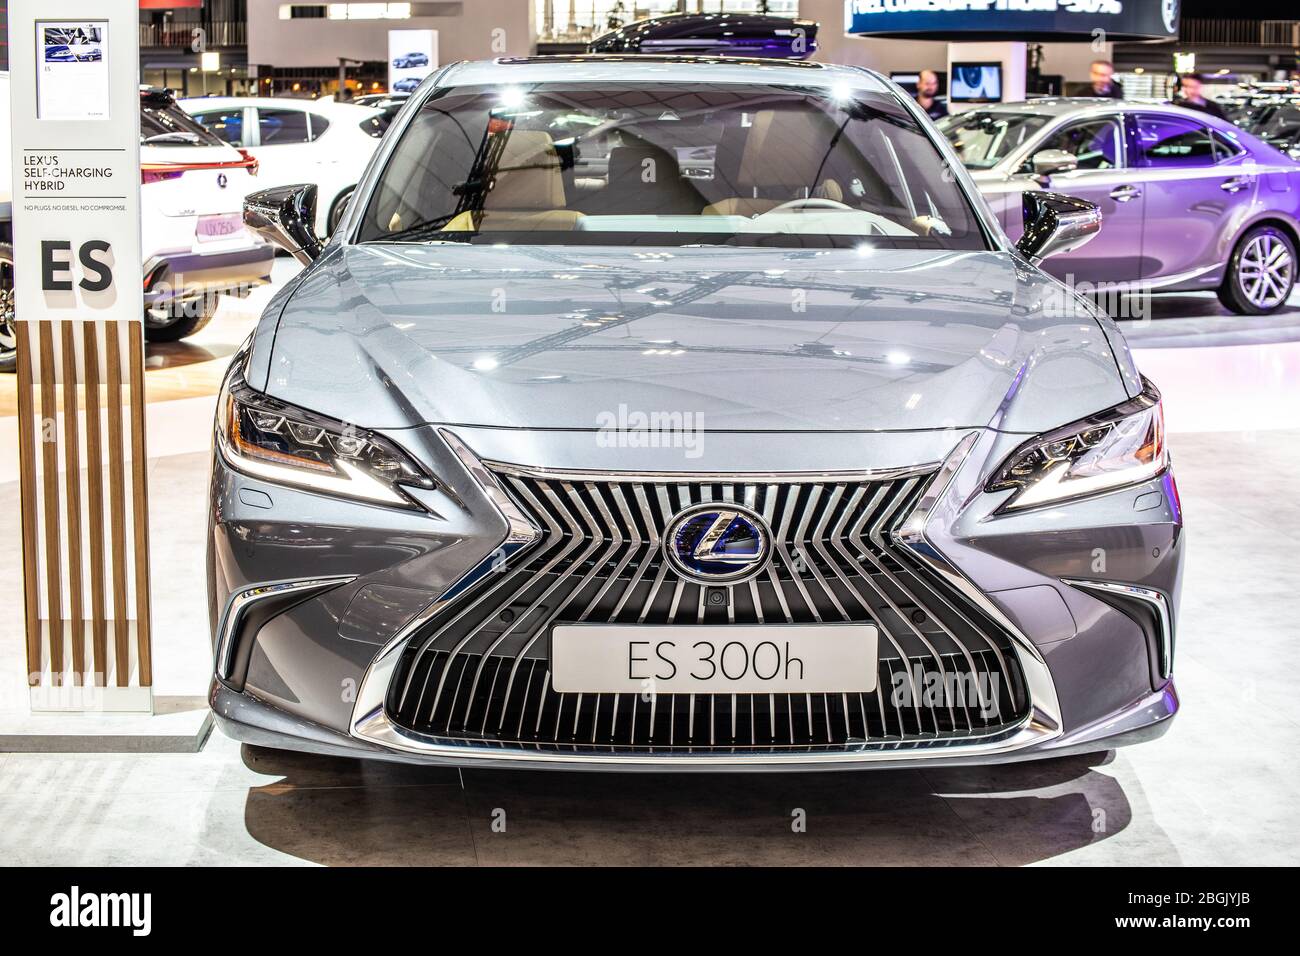 Lexus Es300h High Resolution Stock Photography and Images - Alamy